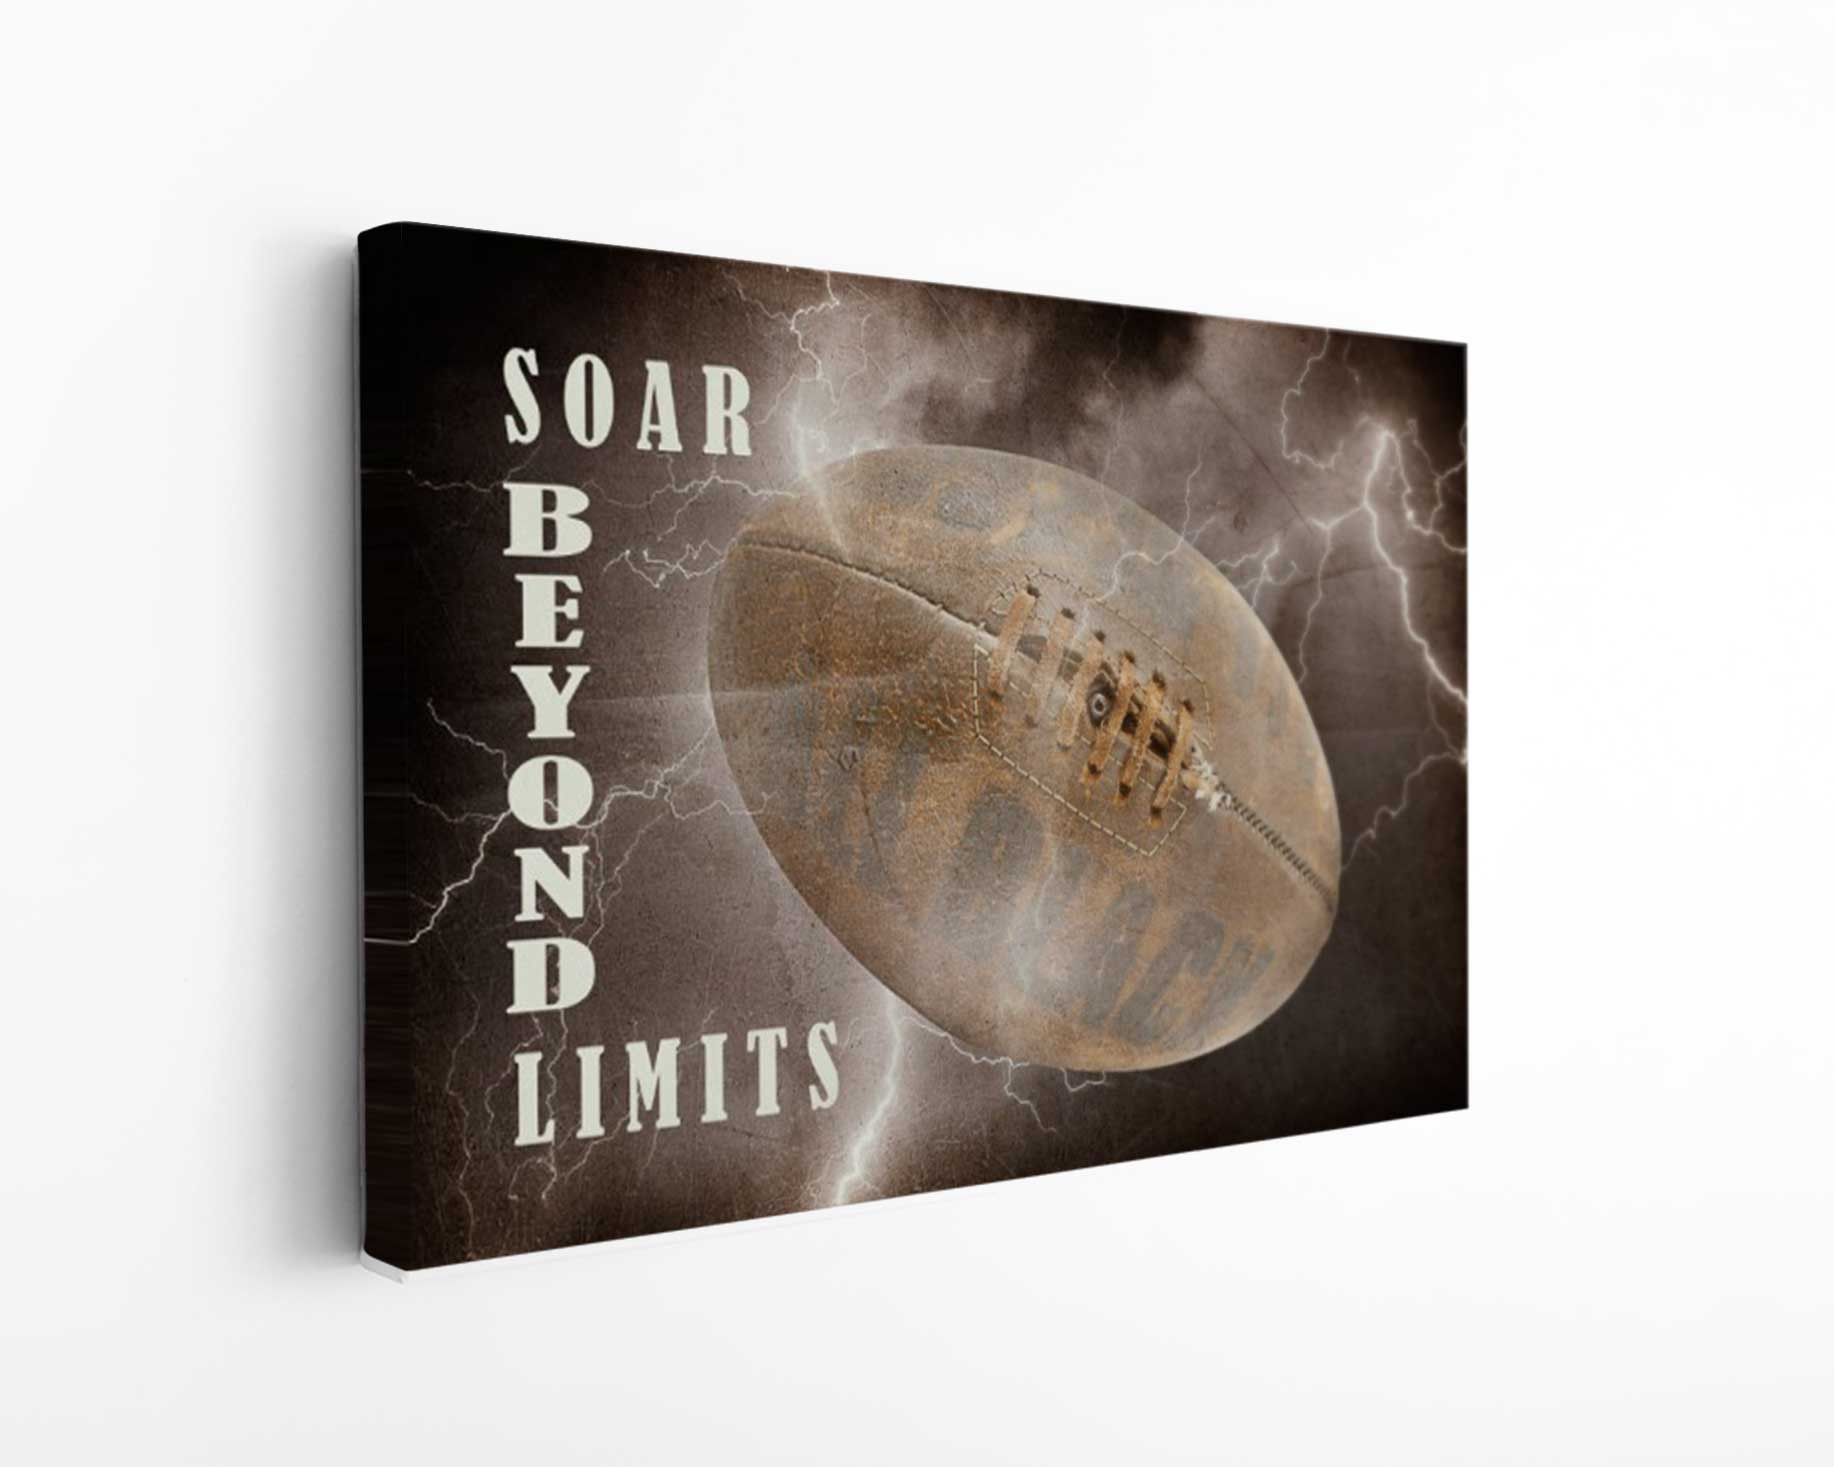 Soar Beyond Limits Rugby Ball Canvas Print Motivation Photography Wall Art